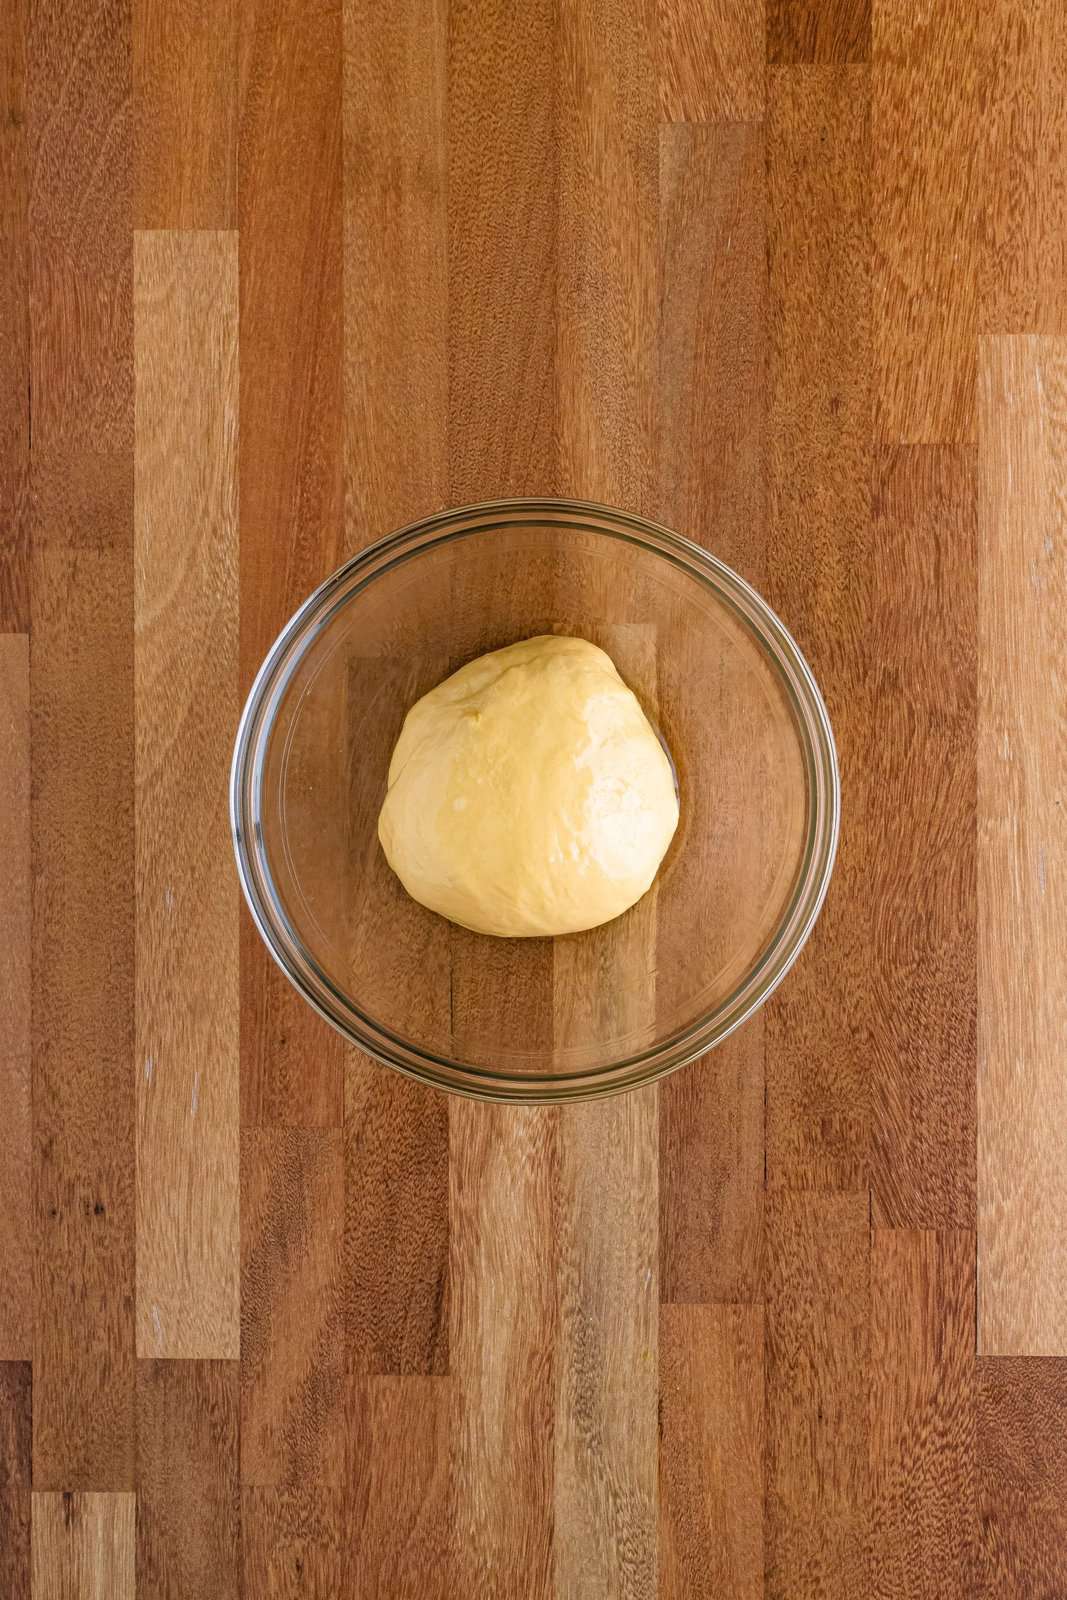 Dough that is rising in a glass bowl.